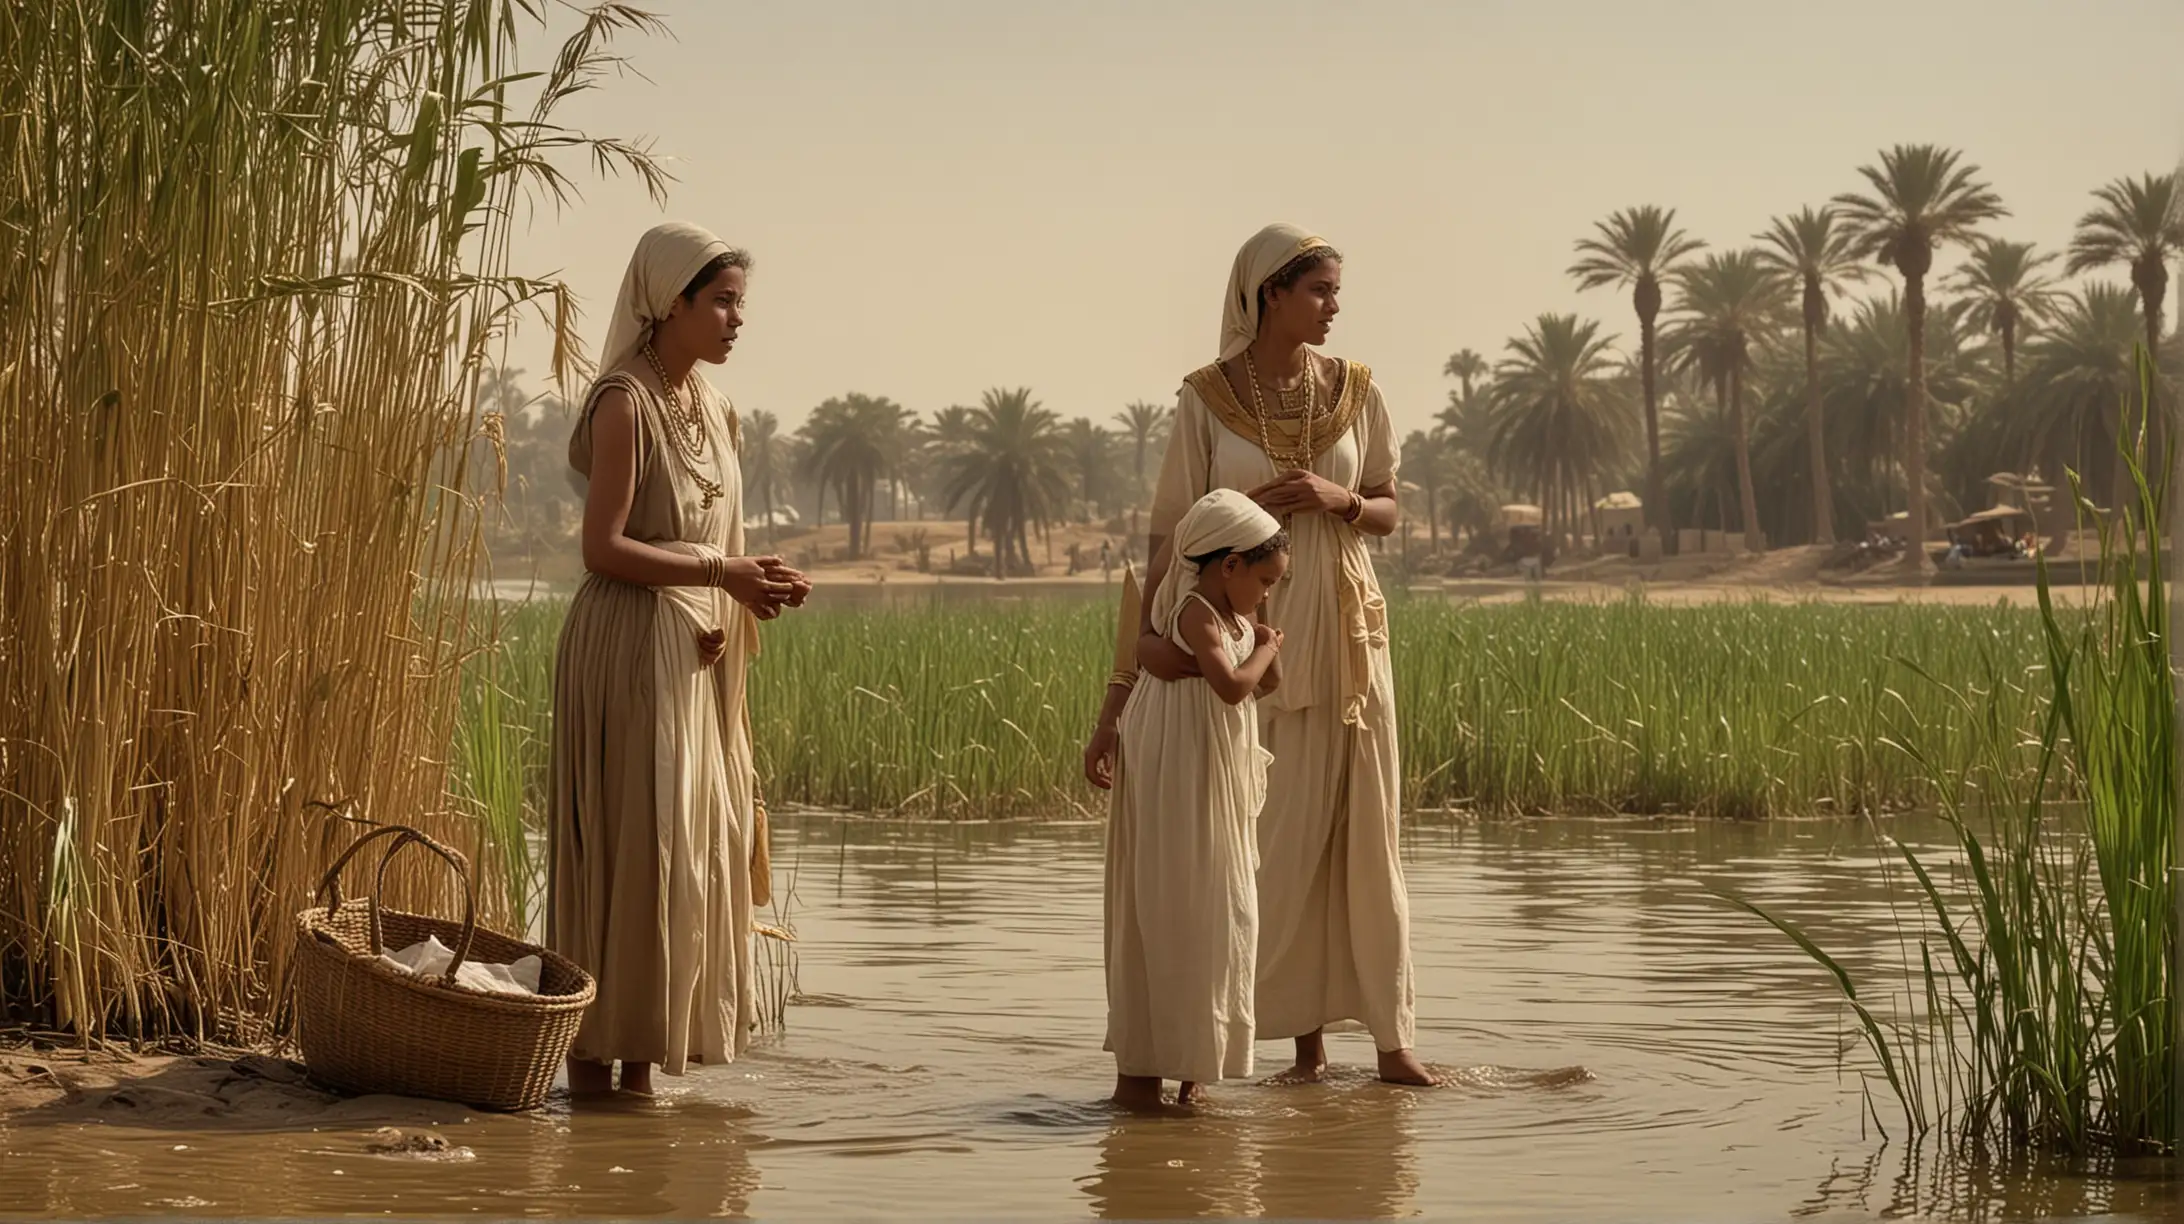 Pharaohs Daughter by the Nile with Maidservants and Baby Basket